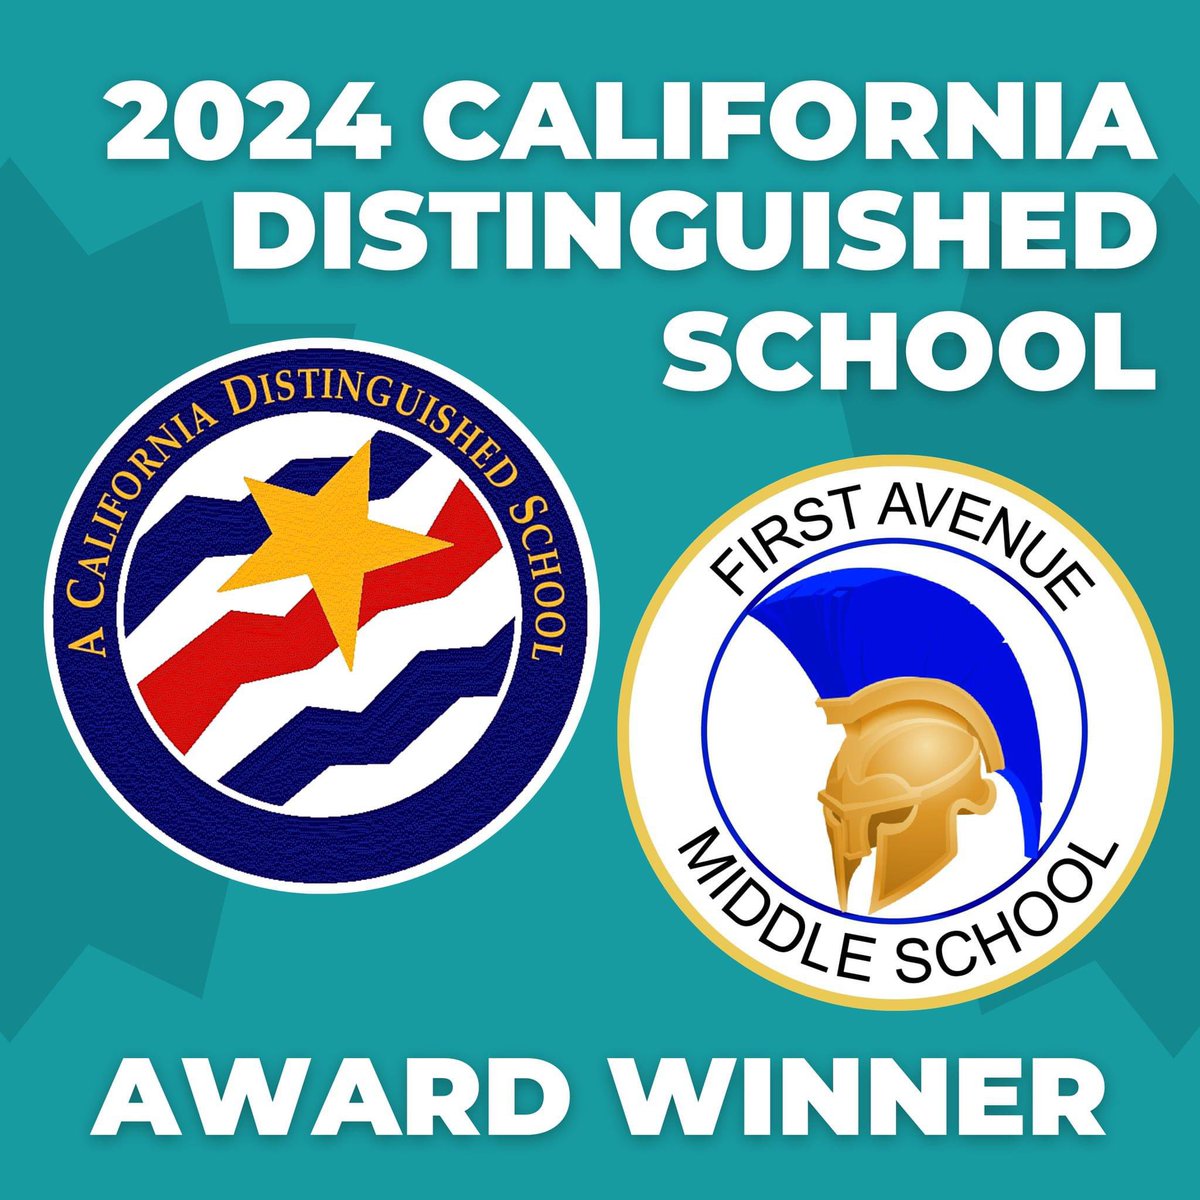 Watch out for our DISTINGUISHED Spartans! 🤩🏆🥳👏 Our very own First Avenue Middle School is one of less than 300 secondary schools (middle & high schools) across our entire state to earn recognition as a 2024 California Distinguished School from the @CADeptEd ! We are so proud!